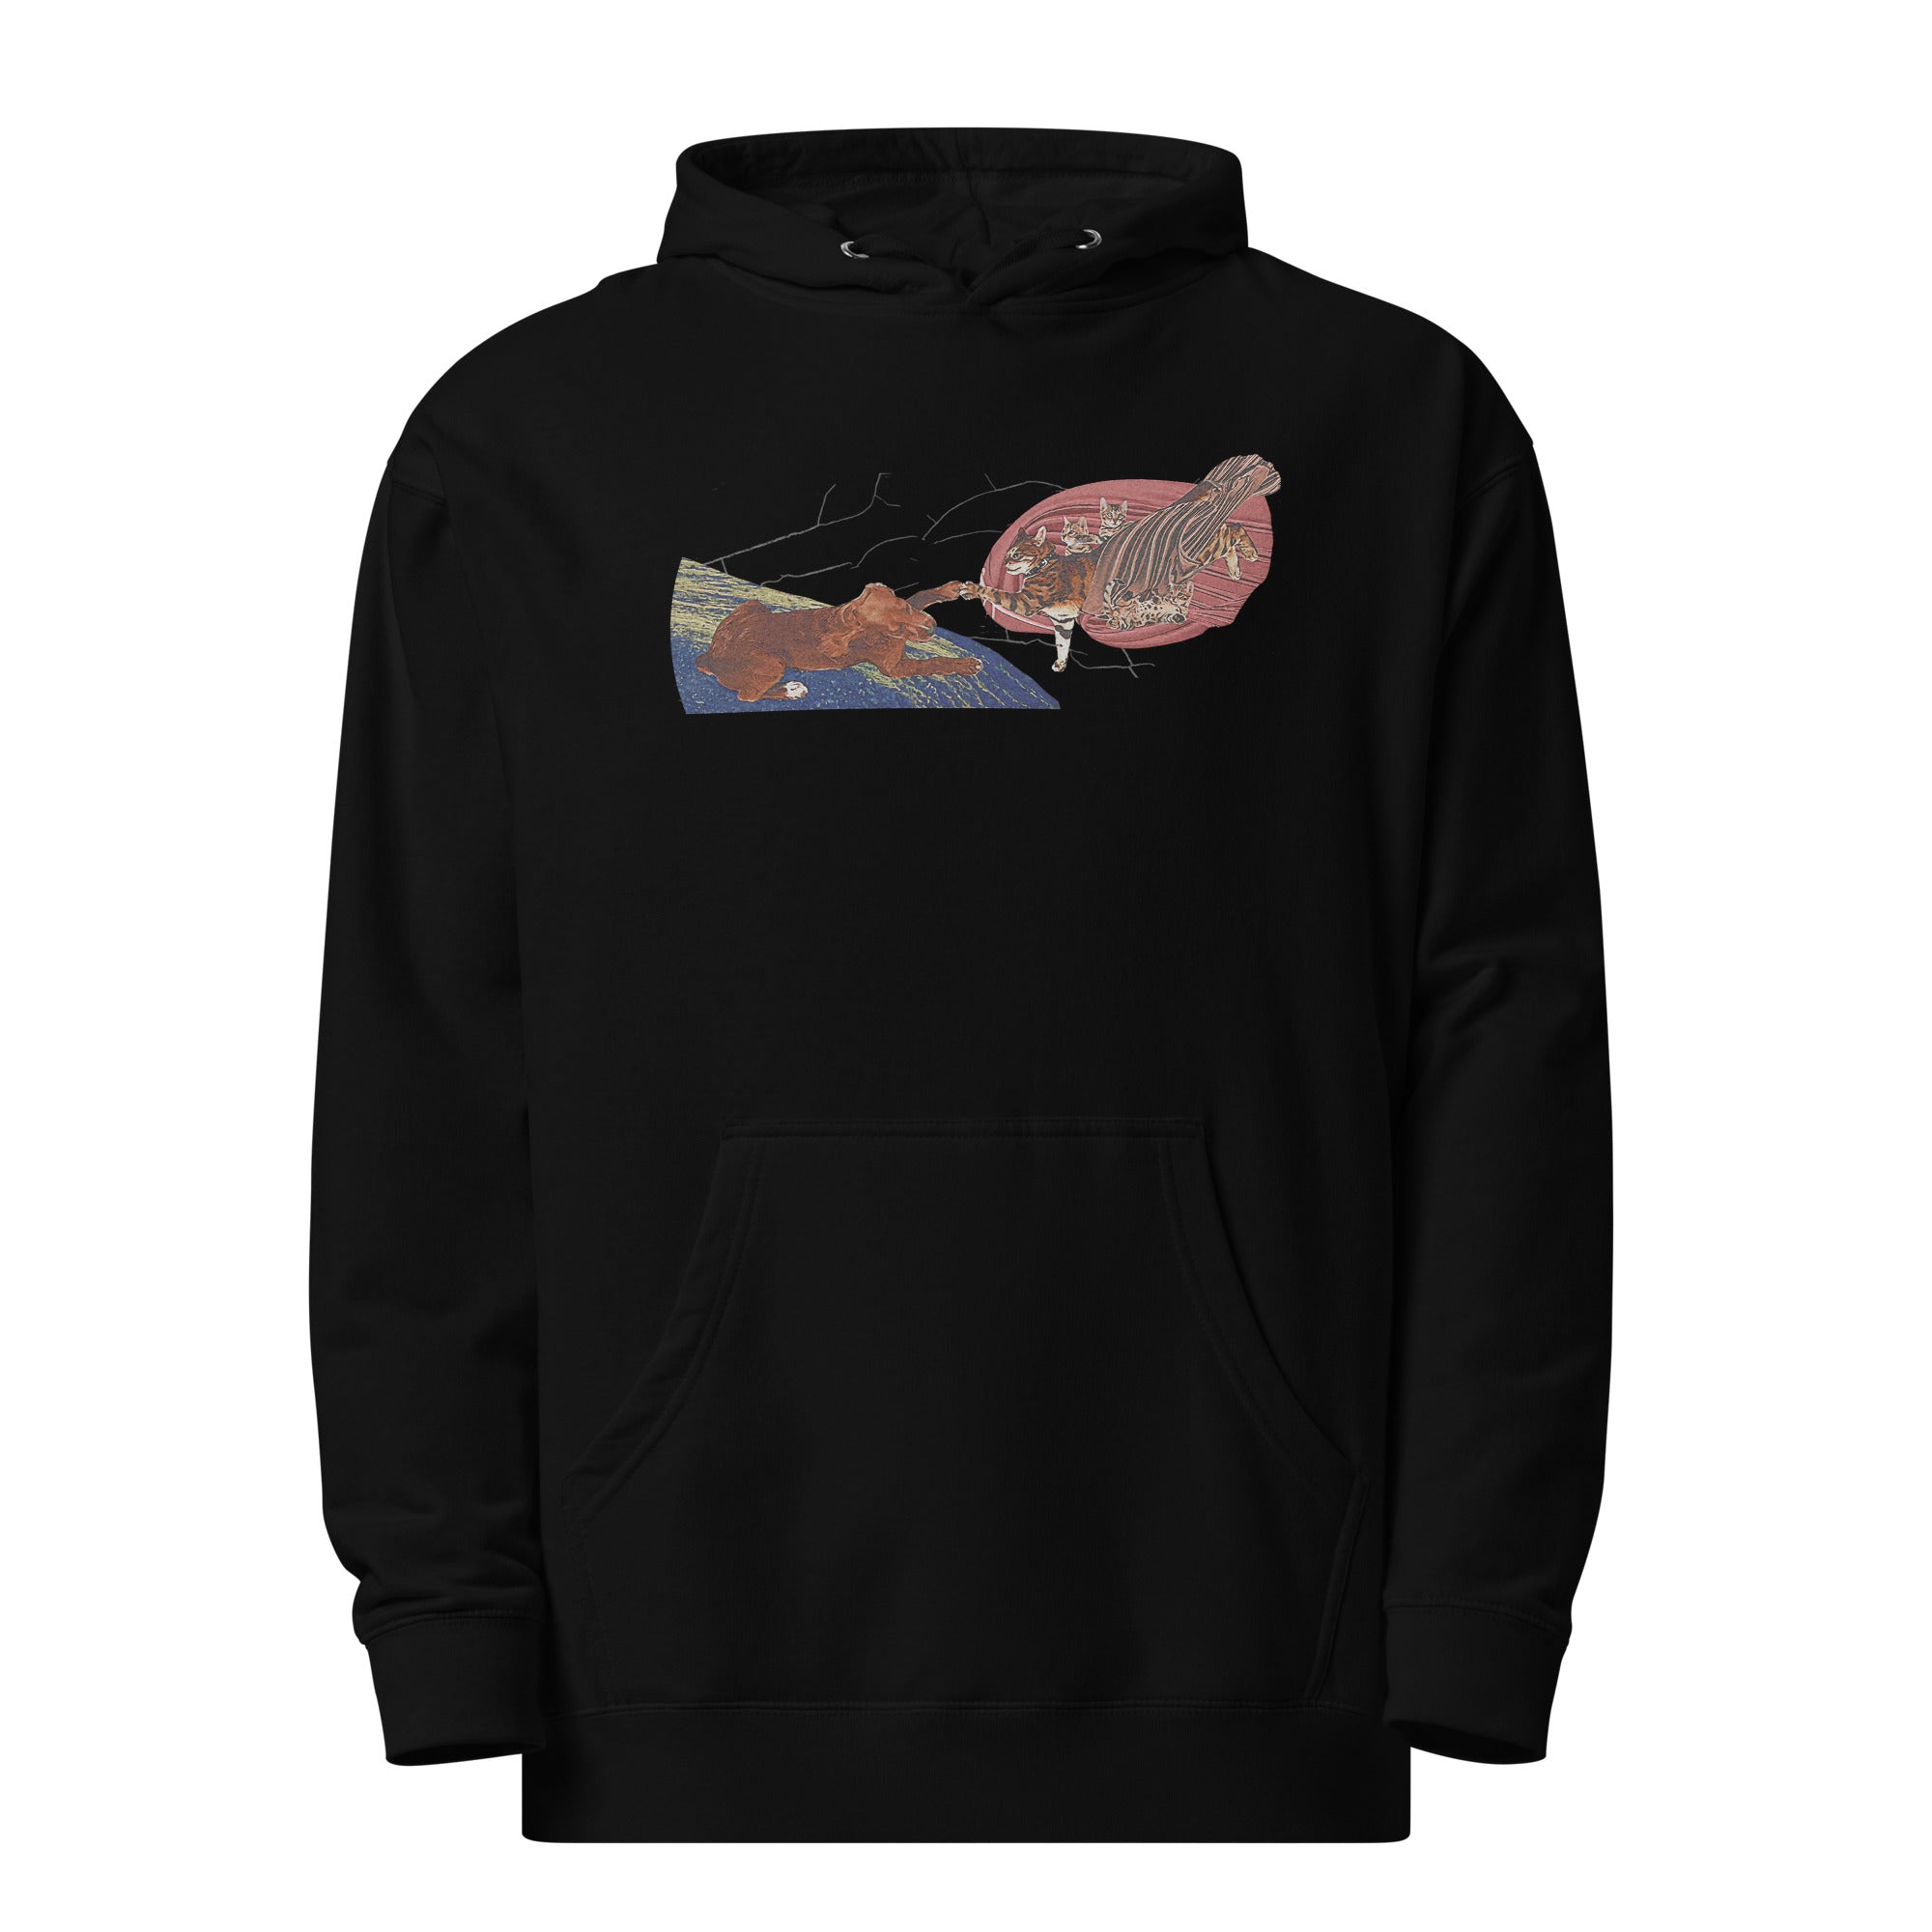 Creation of Dog Unisex midweight hoodie